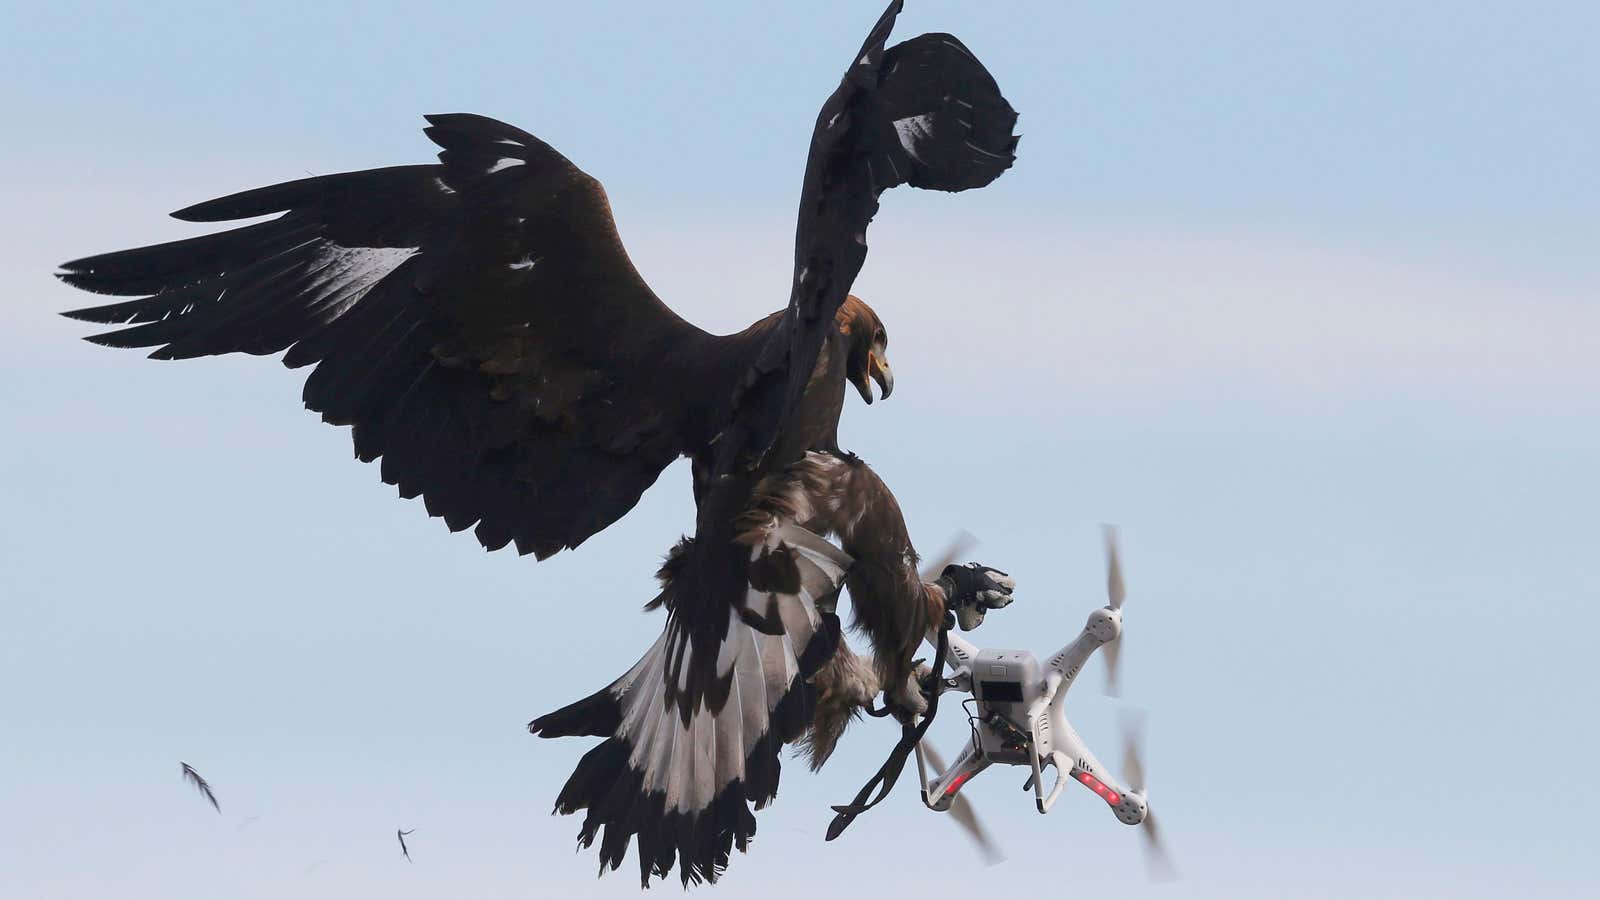 In 2018, be the eagle, not the drone.